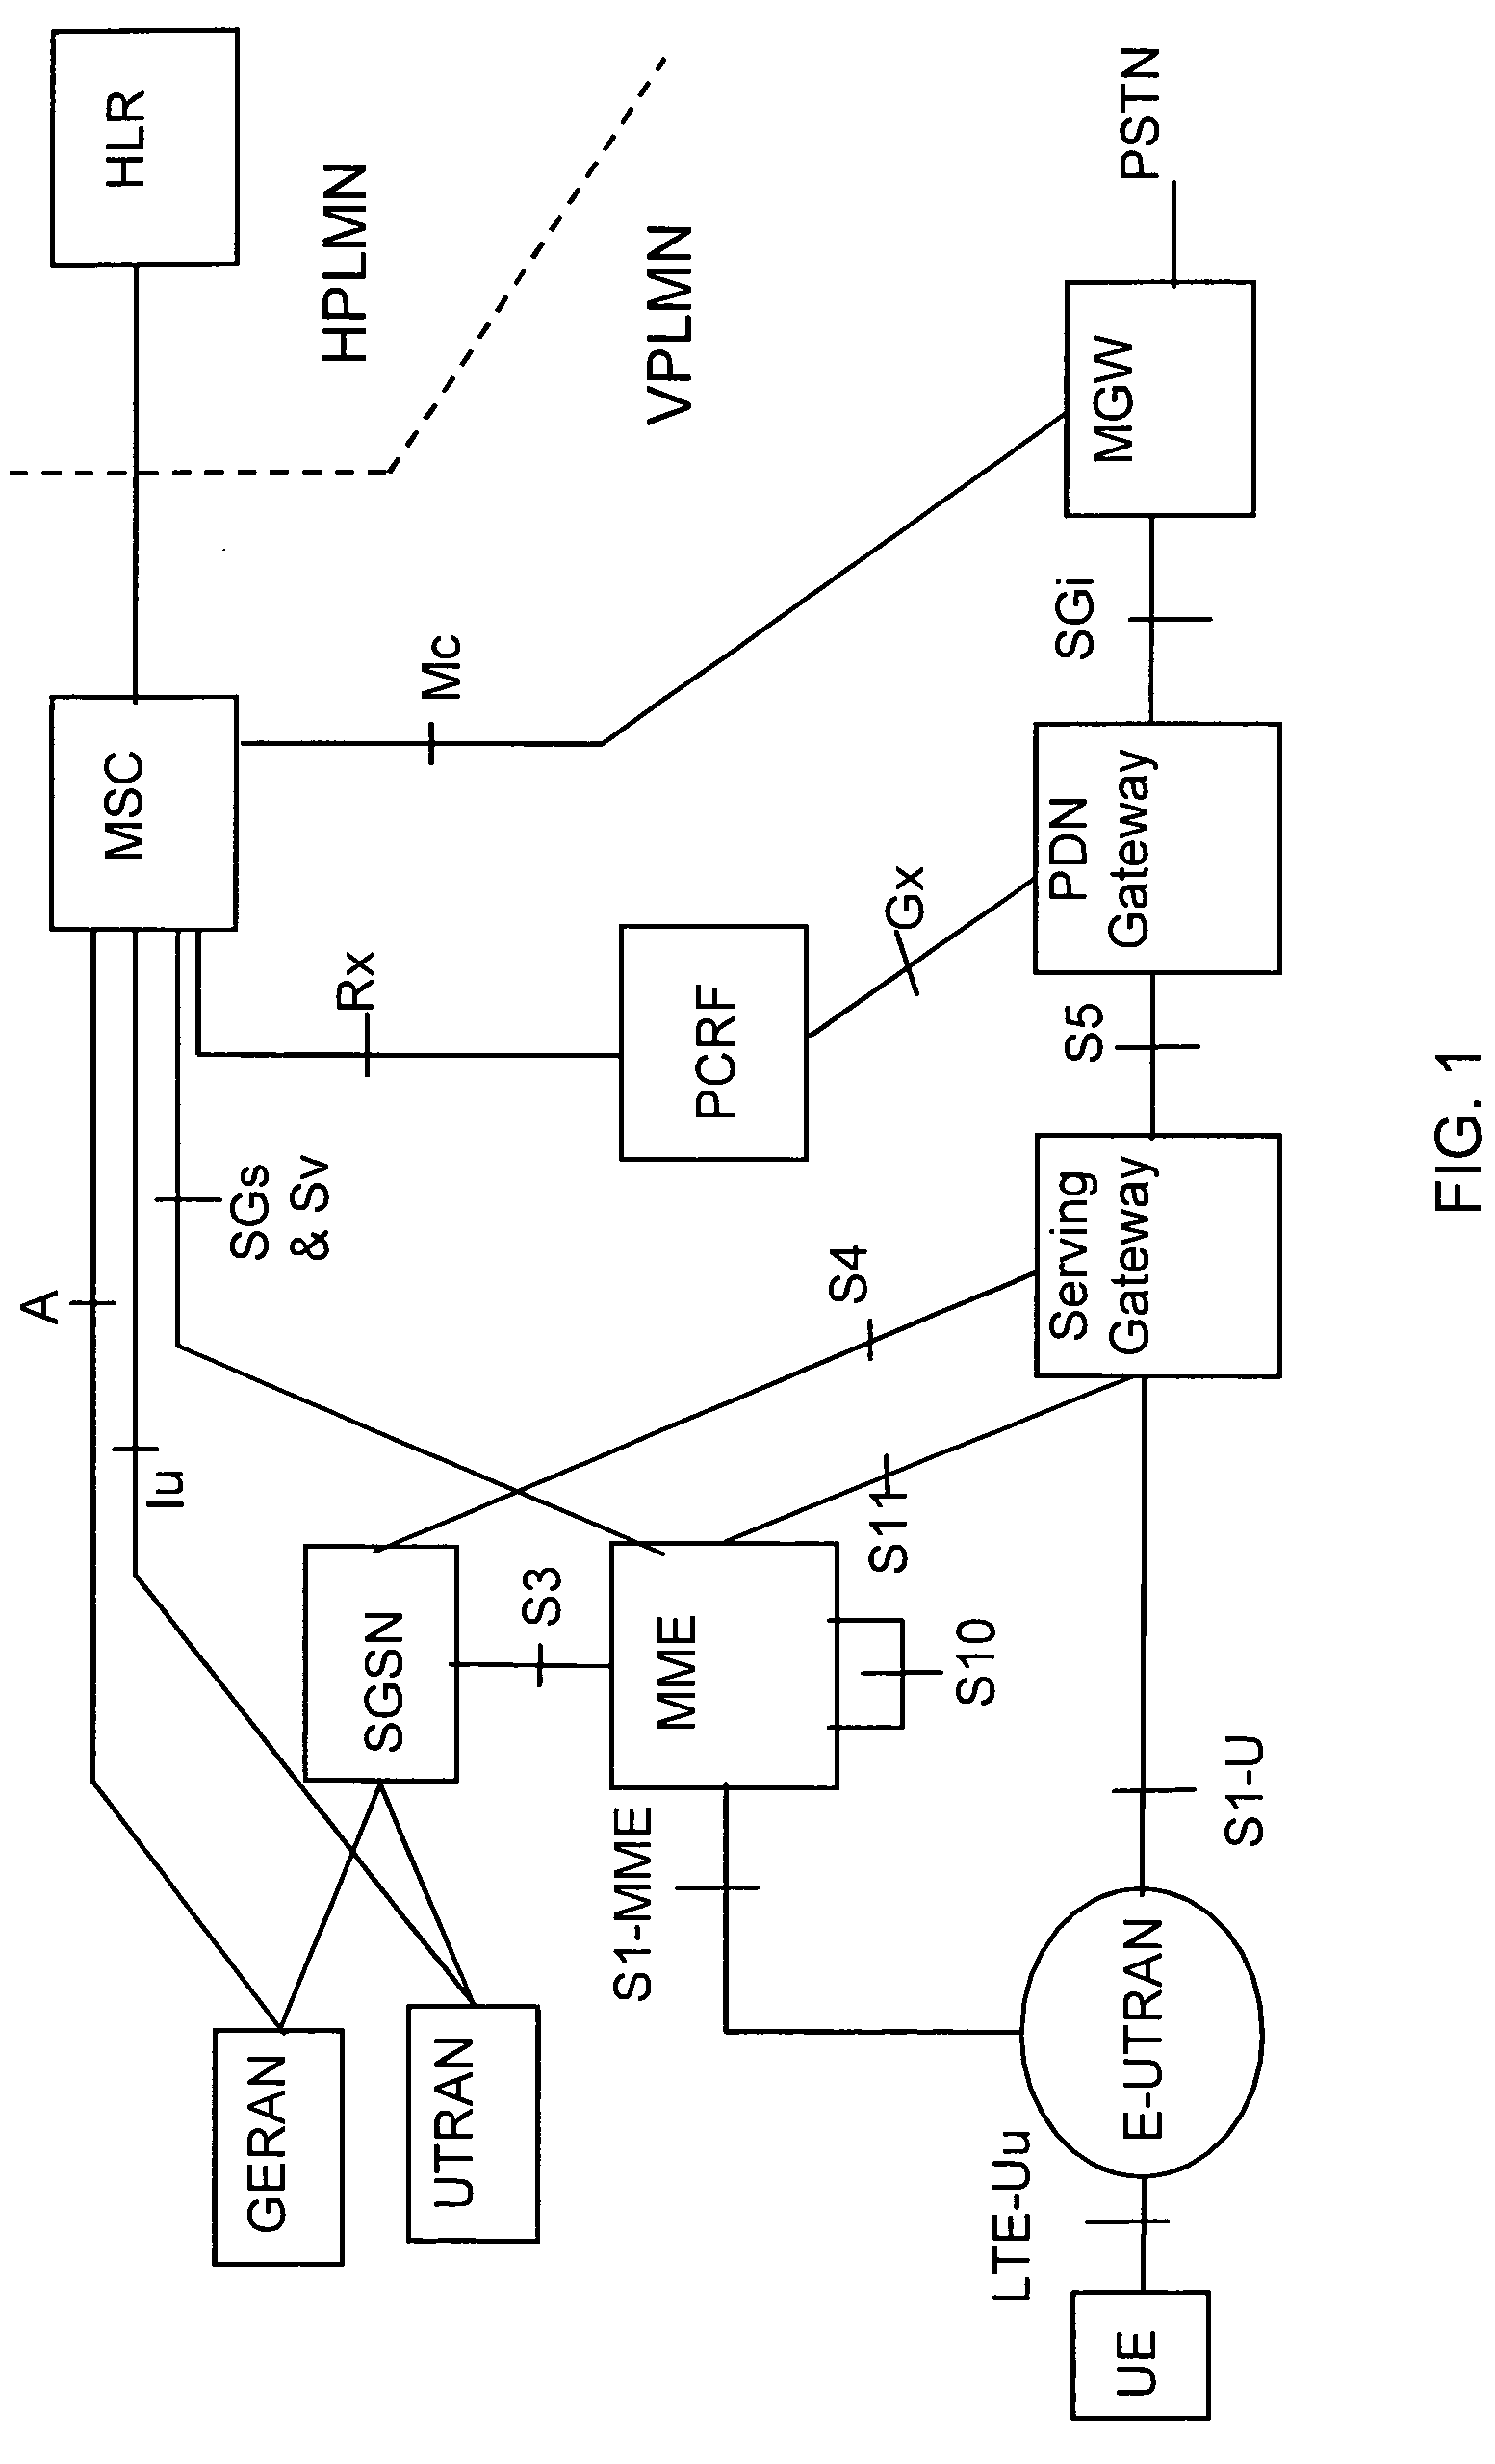 Circuit-switched services over LTE